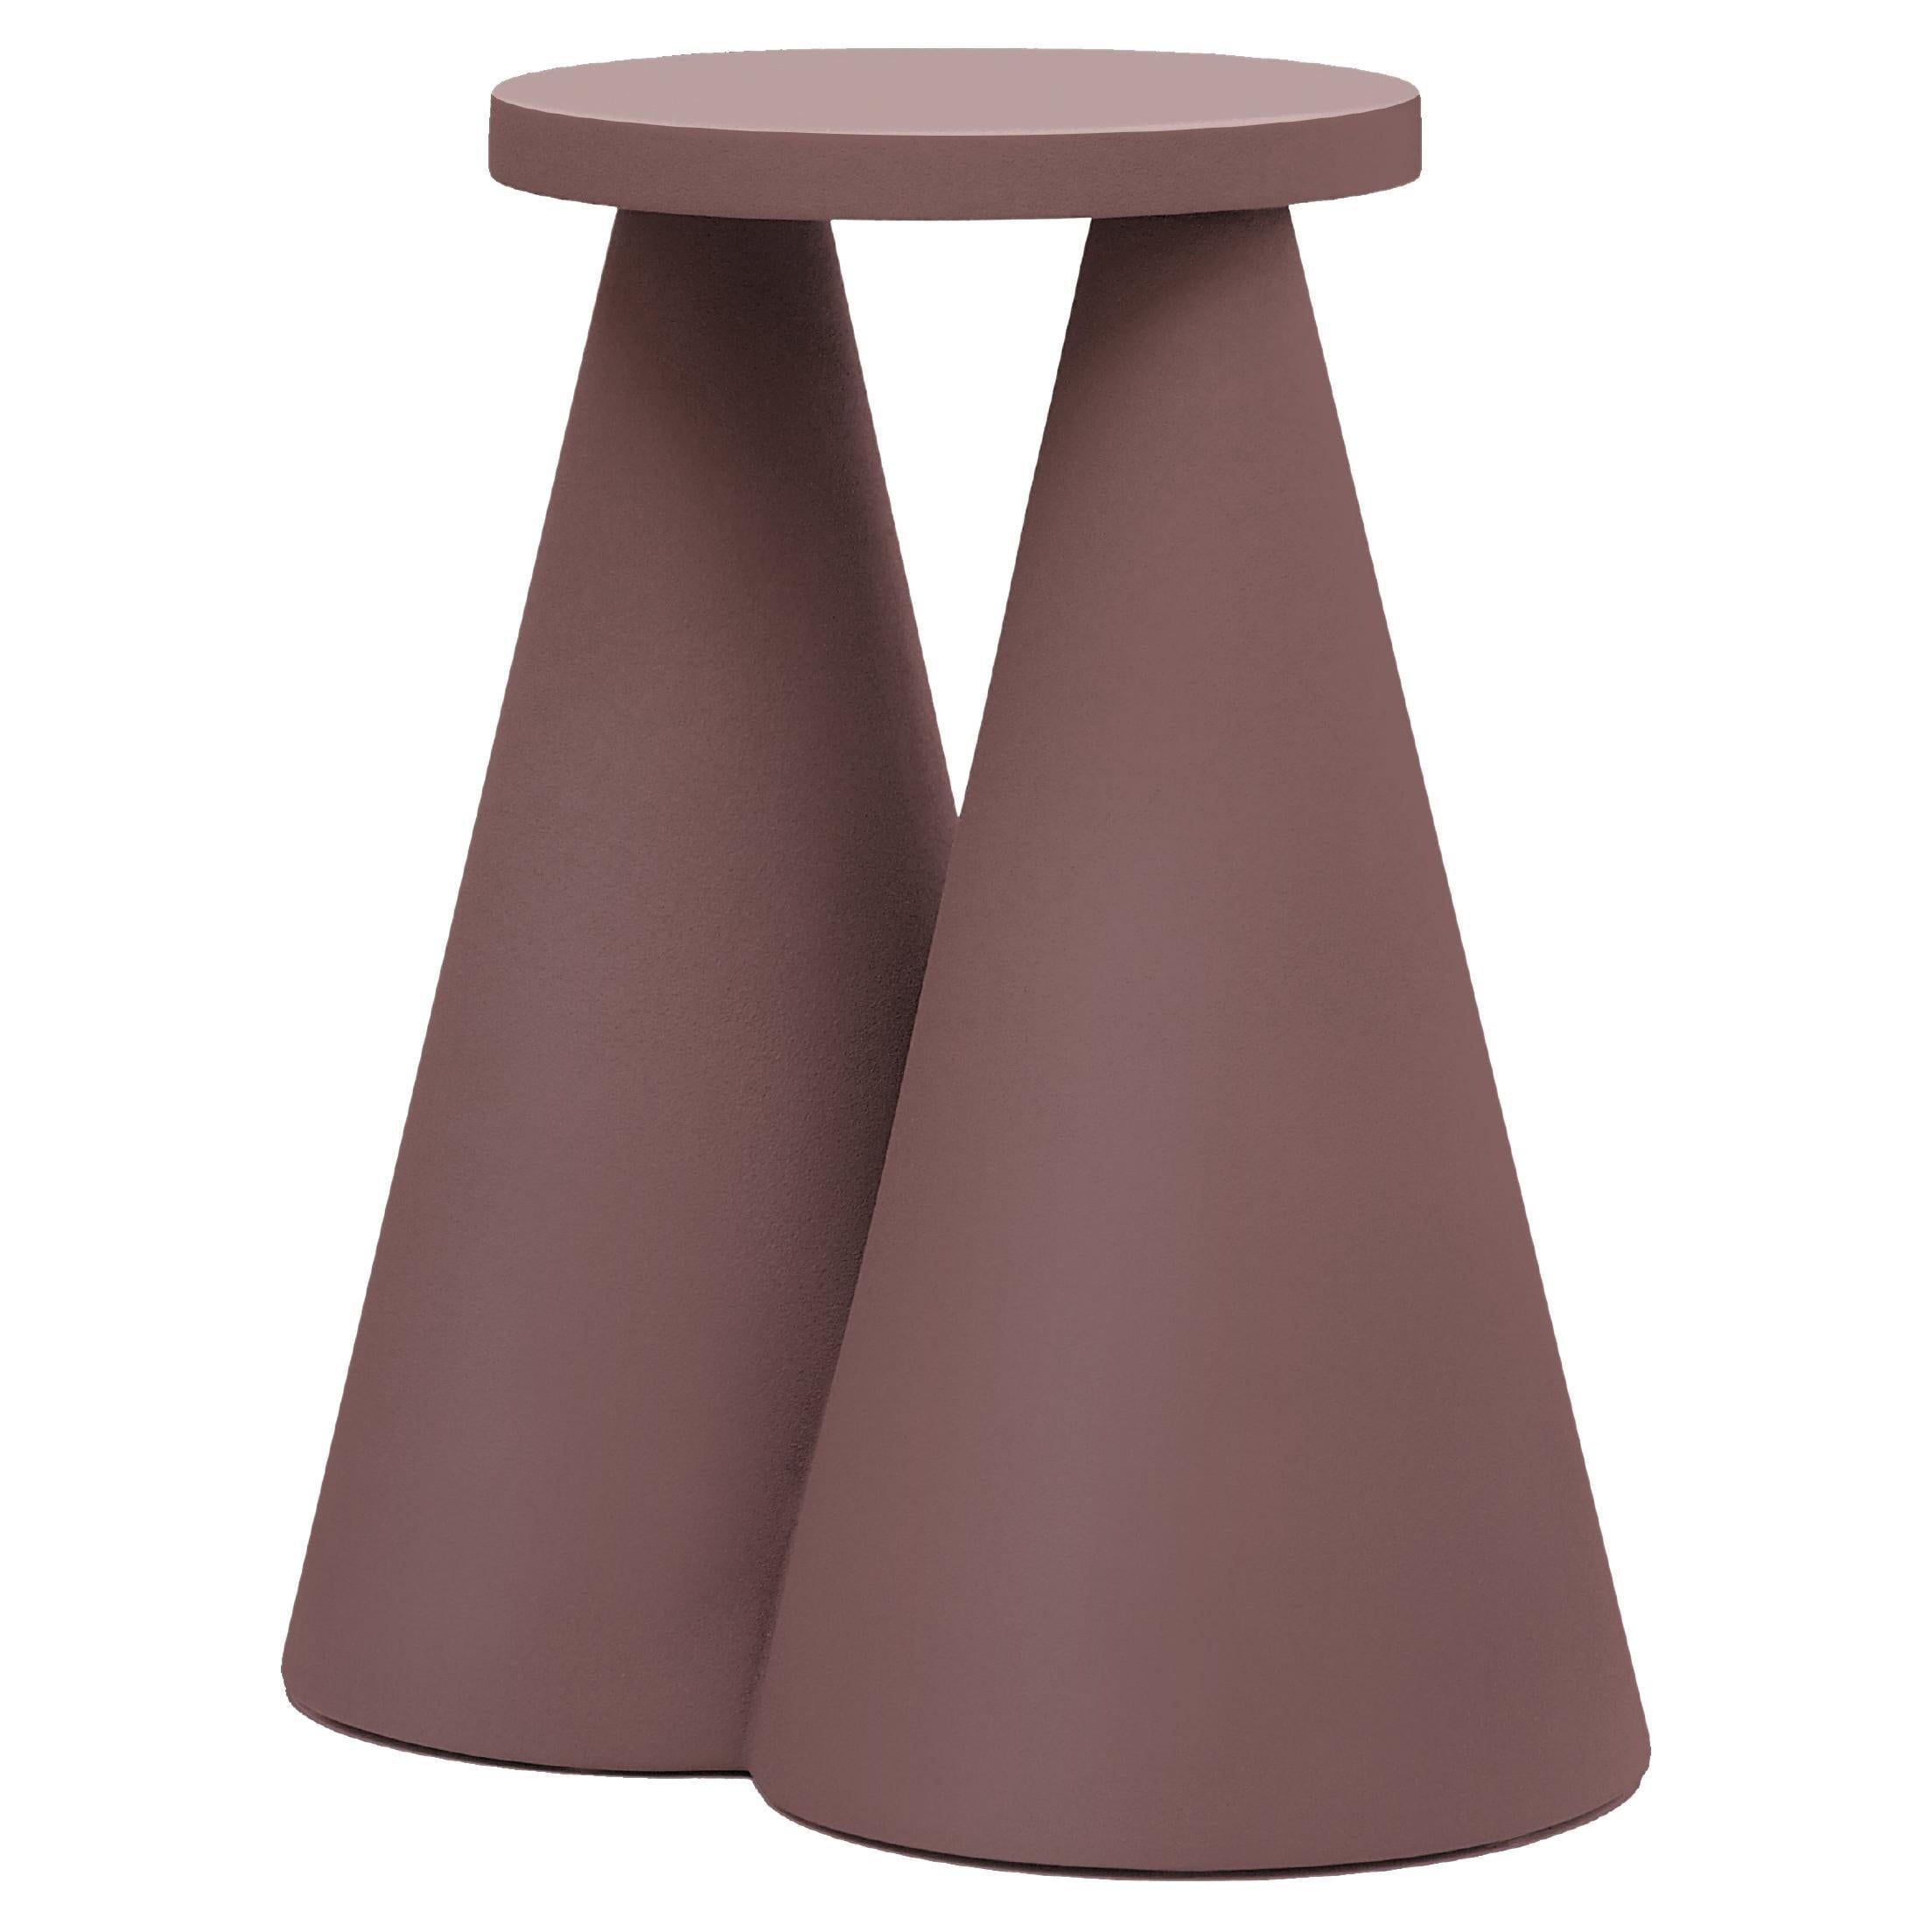 Isola side table by Cara Davide
Dimensions: 25 x 43 x H 45 
Materials: Ceramic /Rough touch finishing

Isola side table is completely made in ceramic using high temperature furnace, to make the material stronger. The large base makes the object